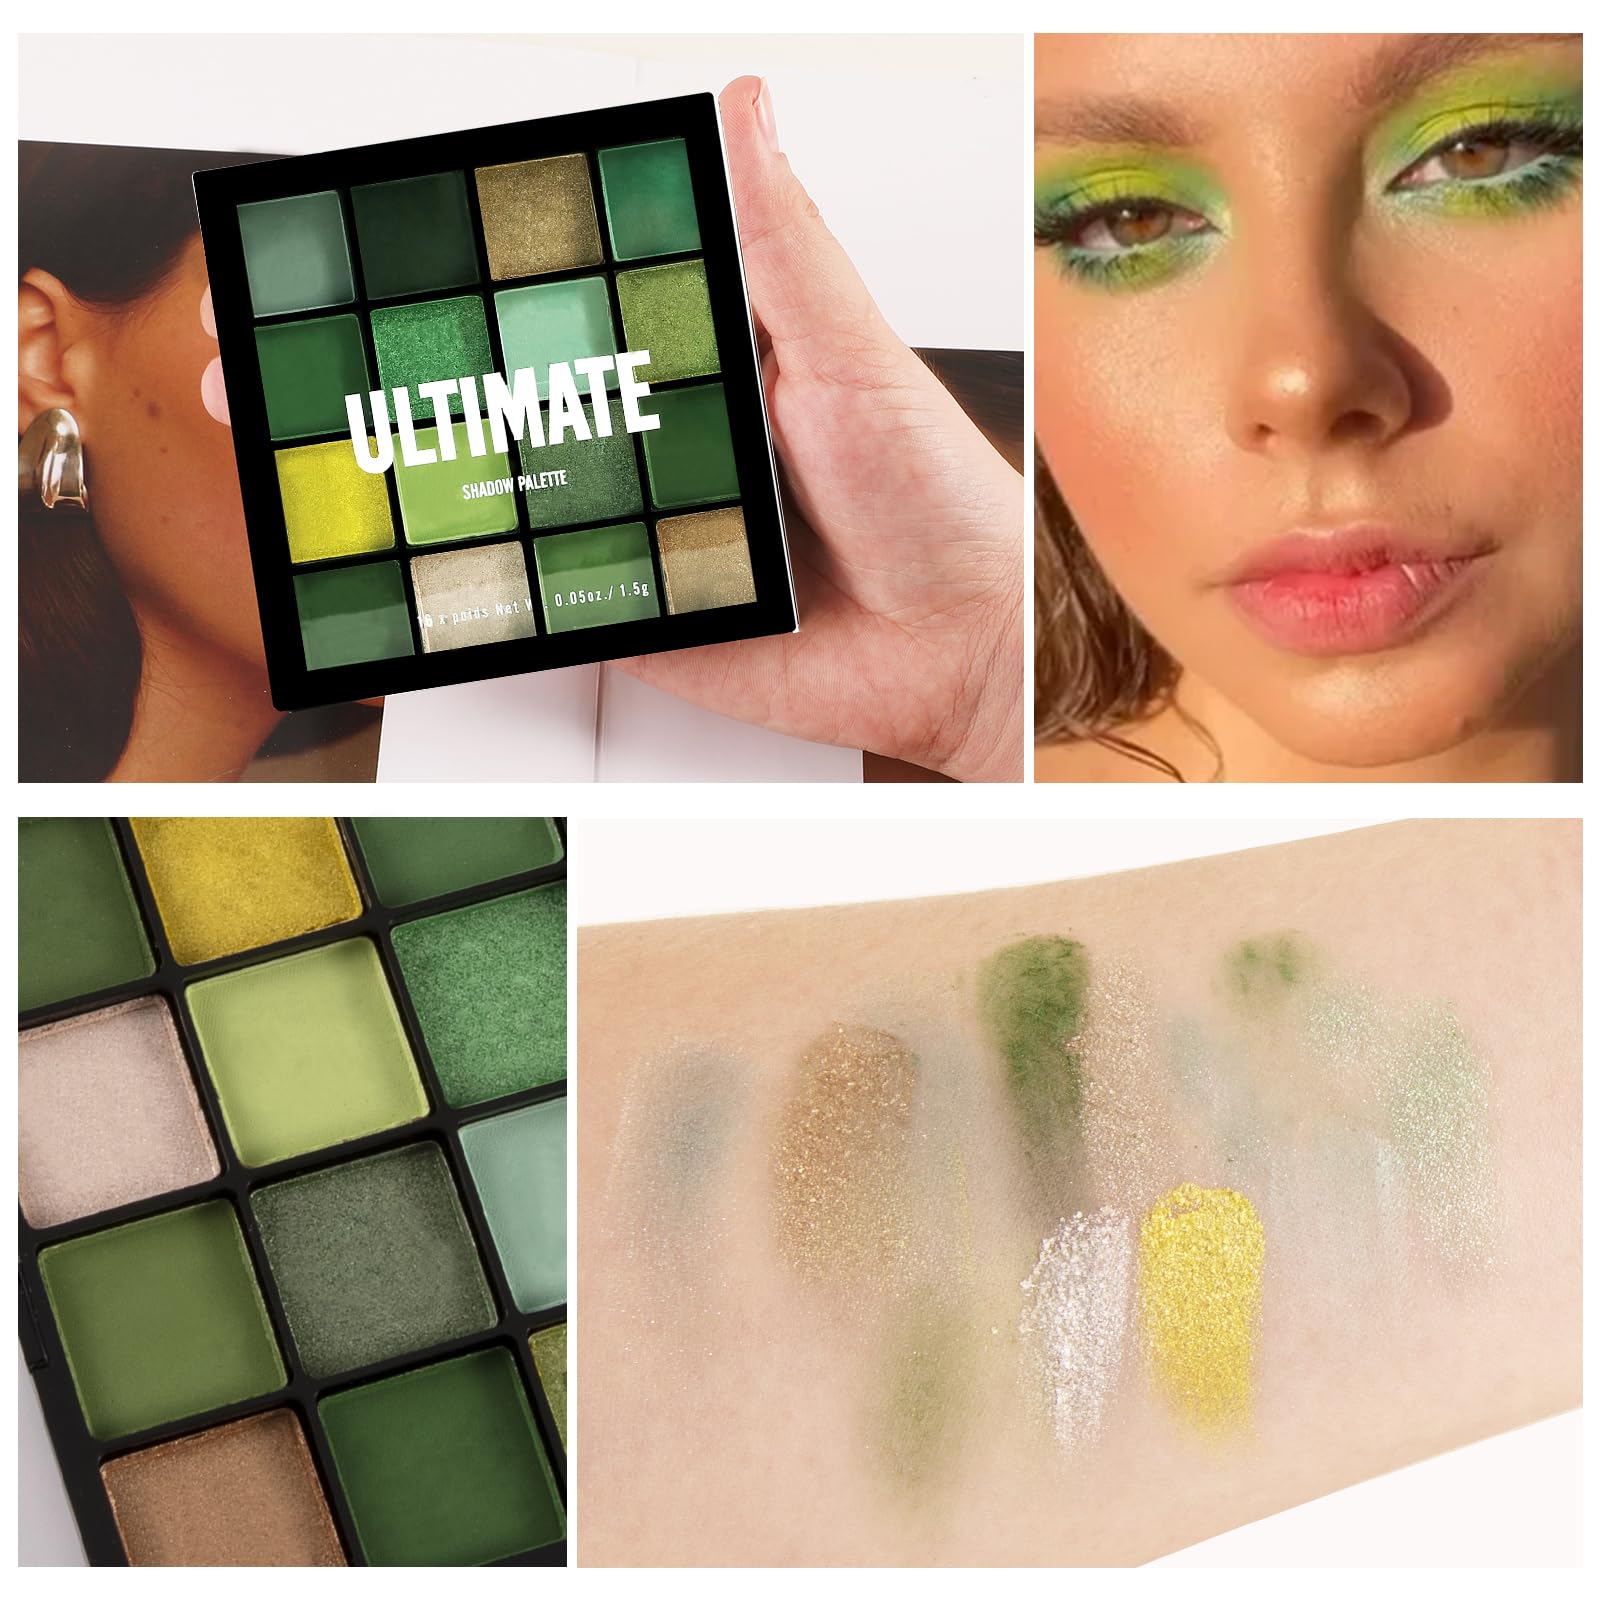 Boobeen Colorful Eyeshadow Palette Makeup-16 Colors, Matte and Glitter Eyeshadow, Bright Eyeshadow palettes, Blendable, Easy to Build Dramatic Glamour Looks (Green)